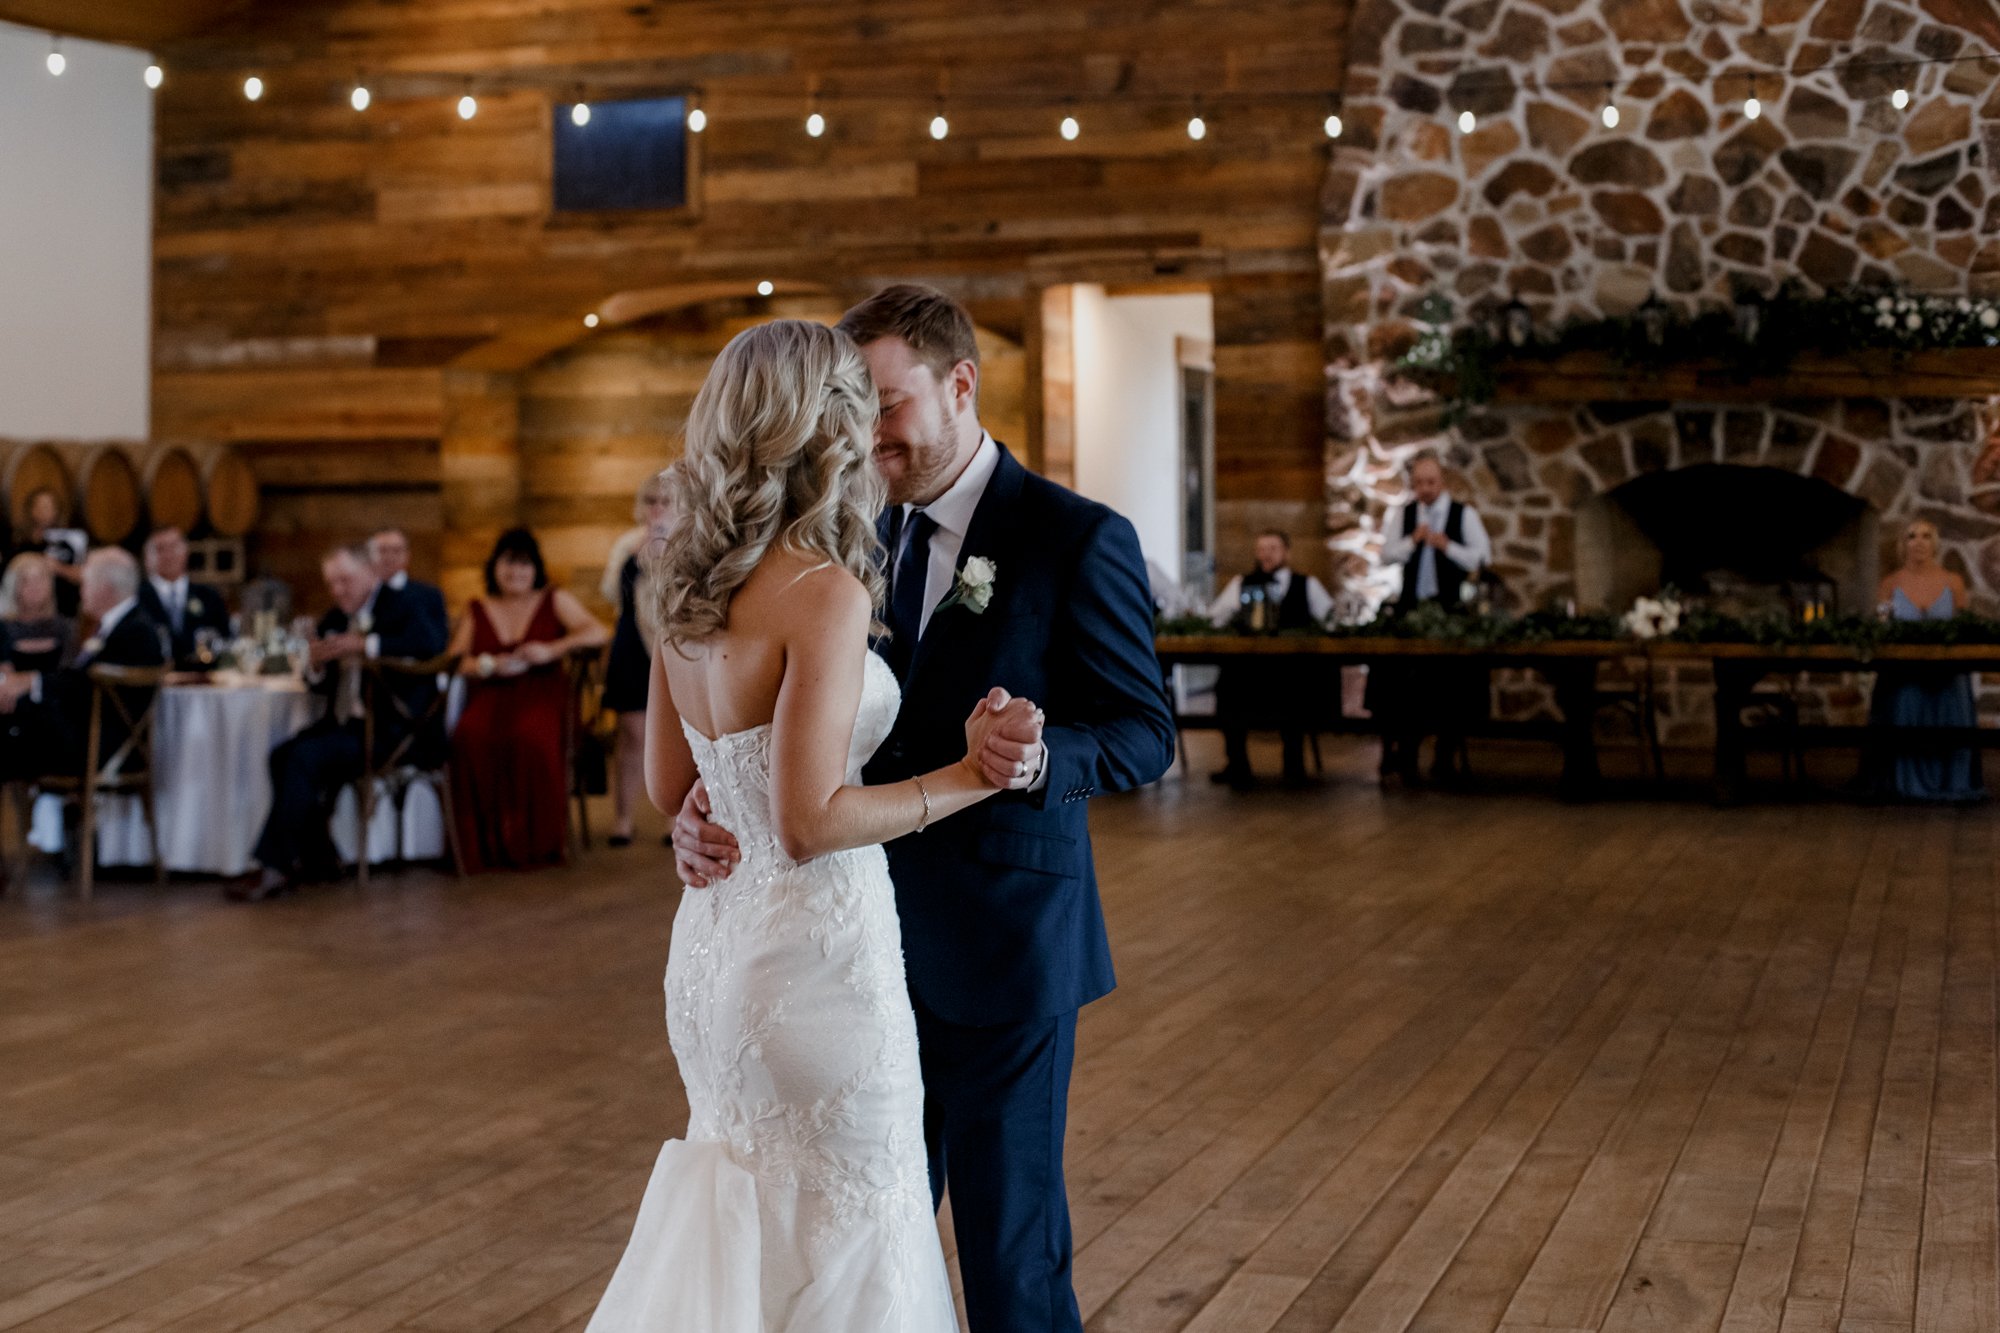 Bride and groom first dance. Wedding at The Vine (New Ulm, TX)